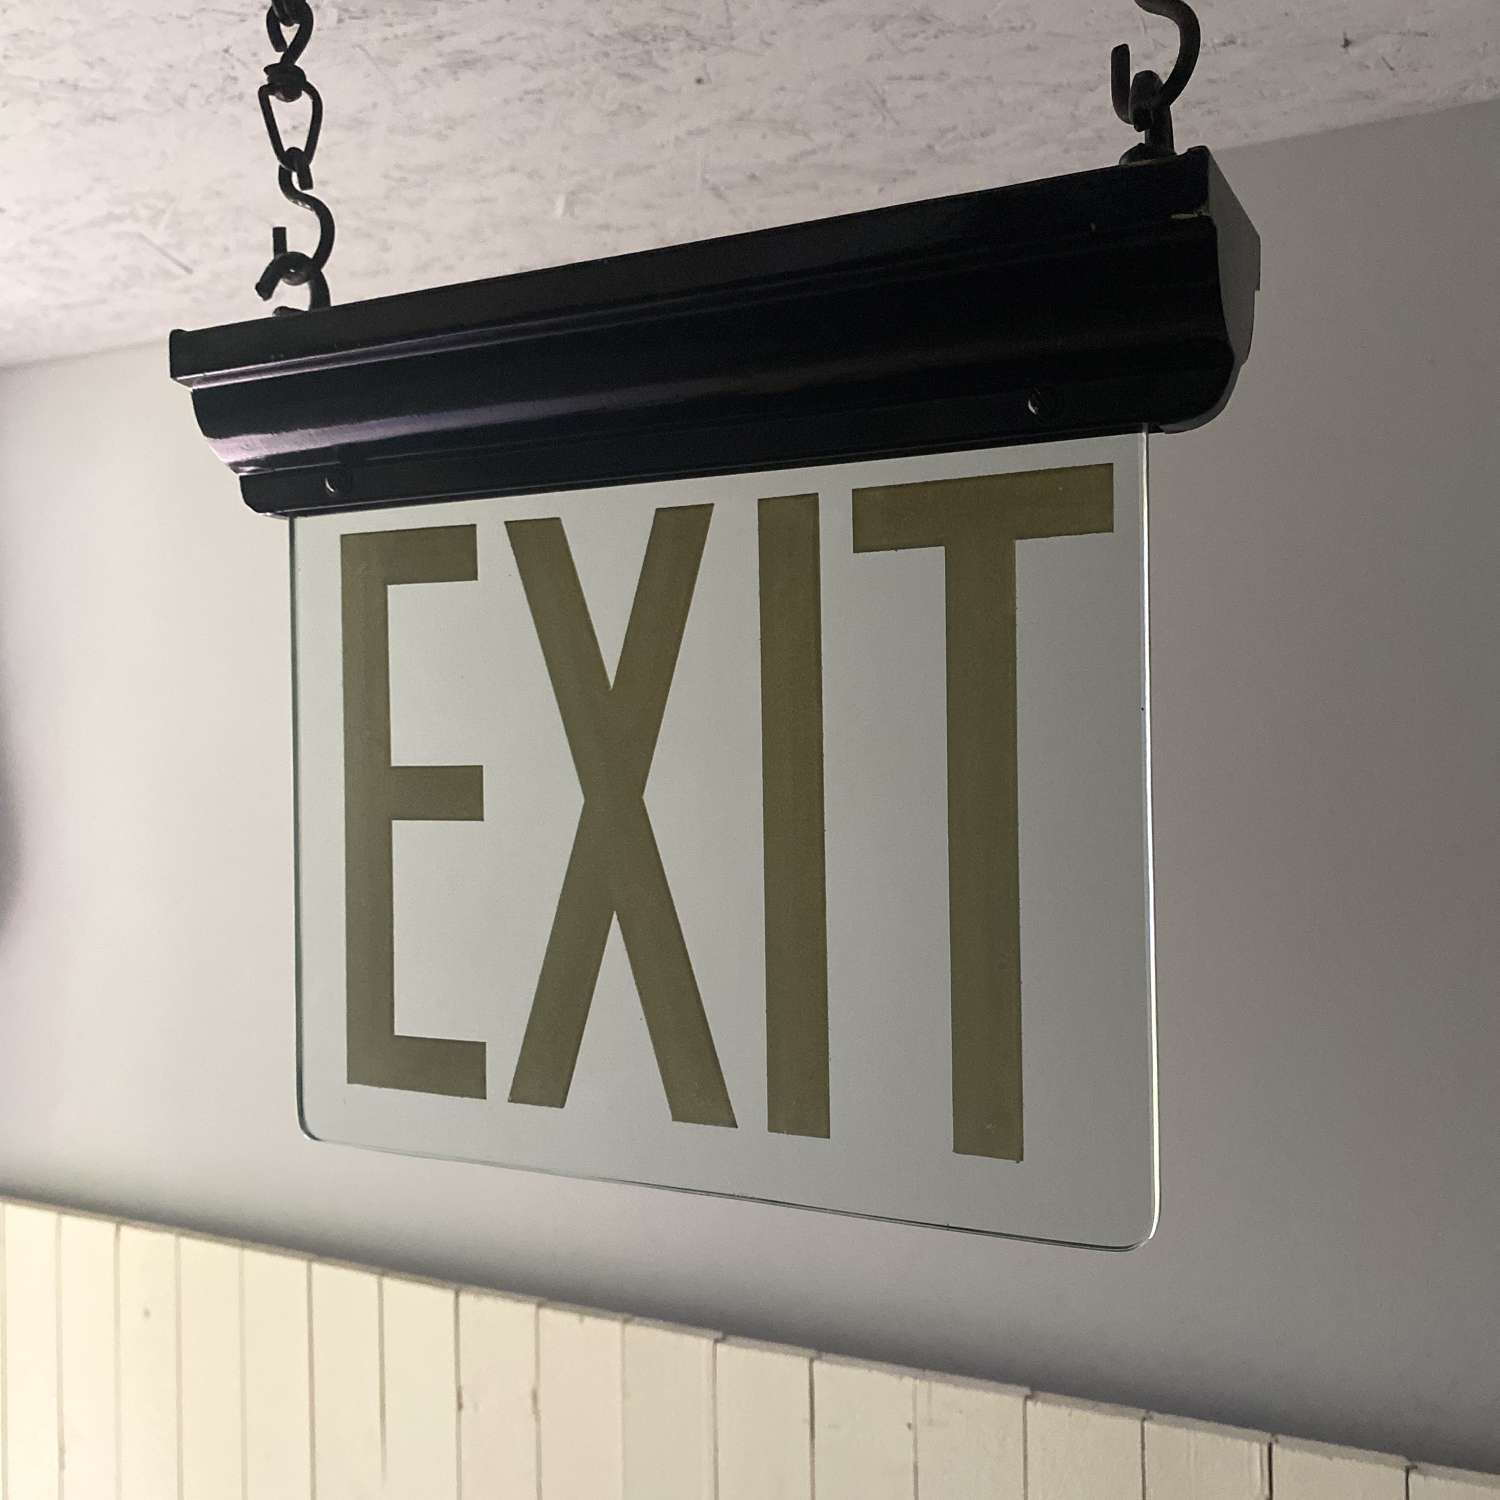 Hanging Glass Exit Sign